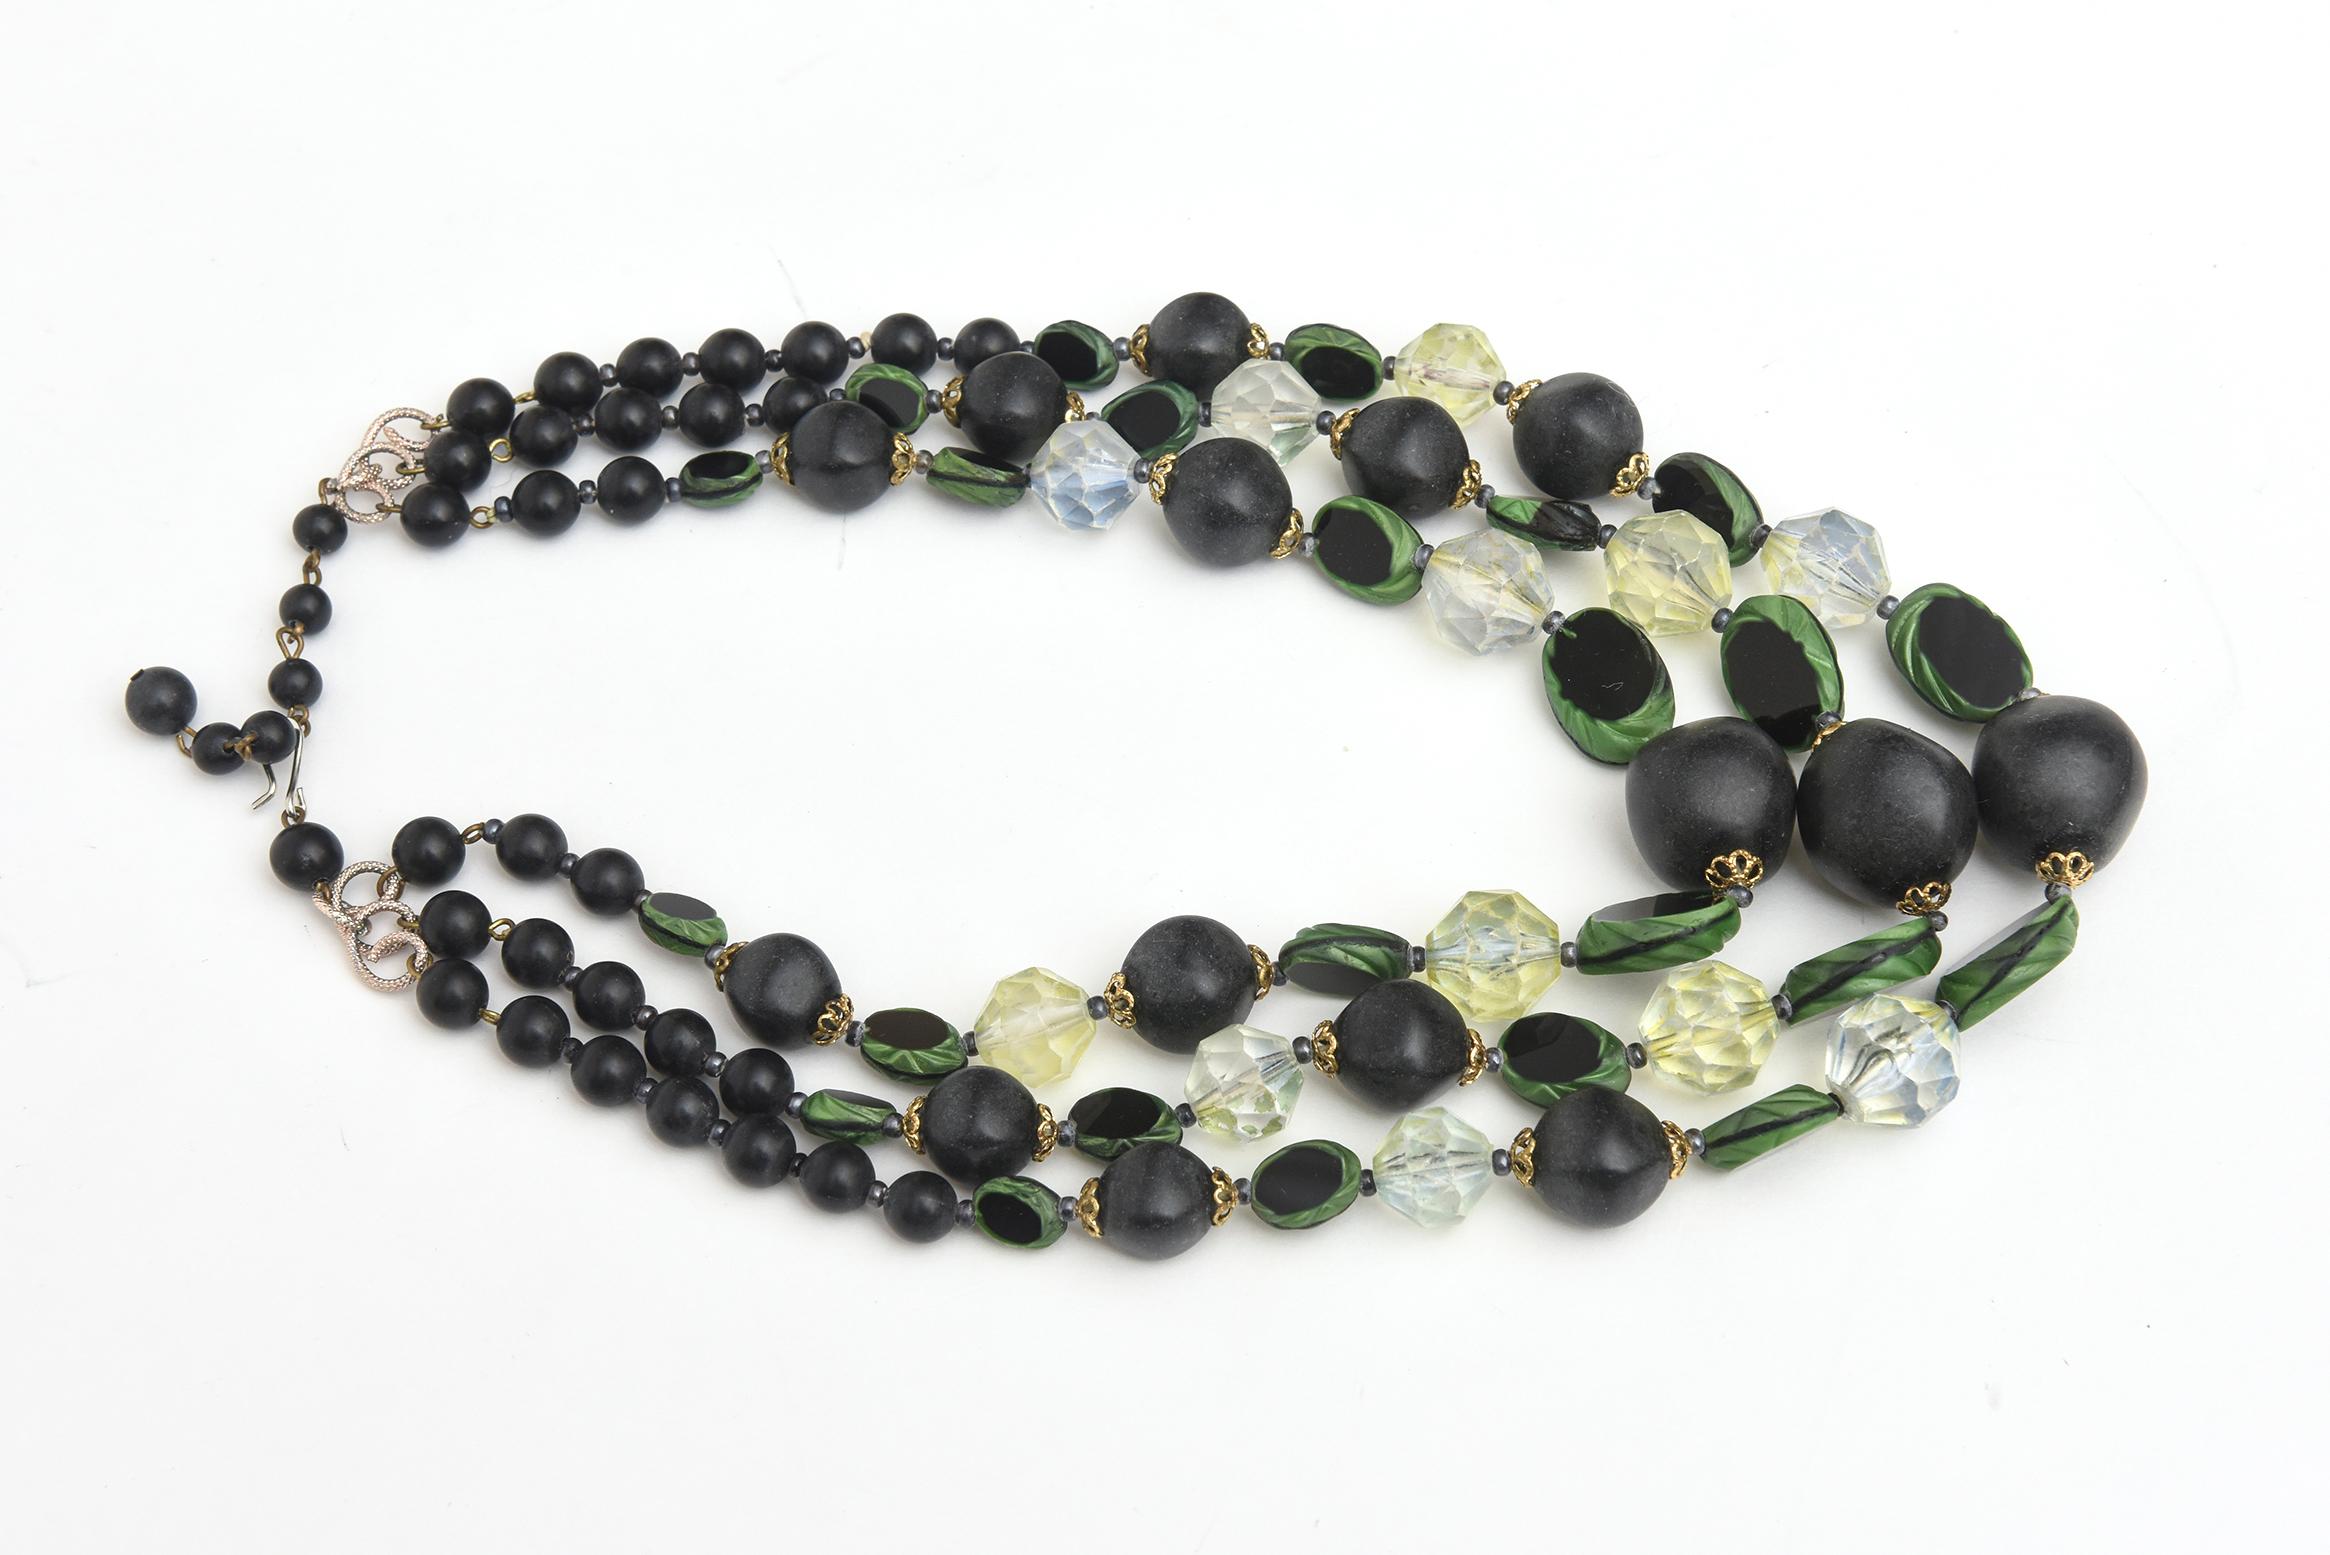 This lovely Czech vintage resin and lucite 3 stand necklace has beautiful colors in shades of green and black disks interspersed with clear resin and lucite shapes. It is from the 50's. Green is a go to color for 2024. It is light in weight and